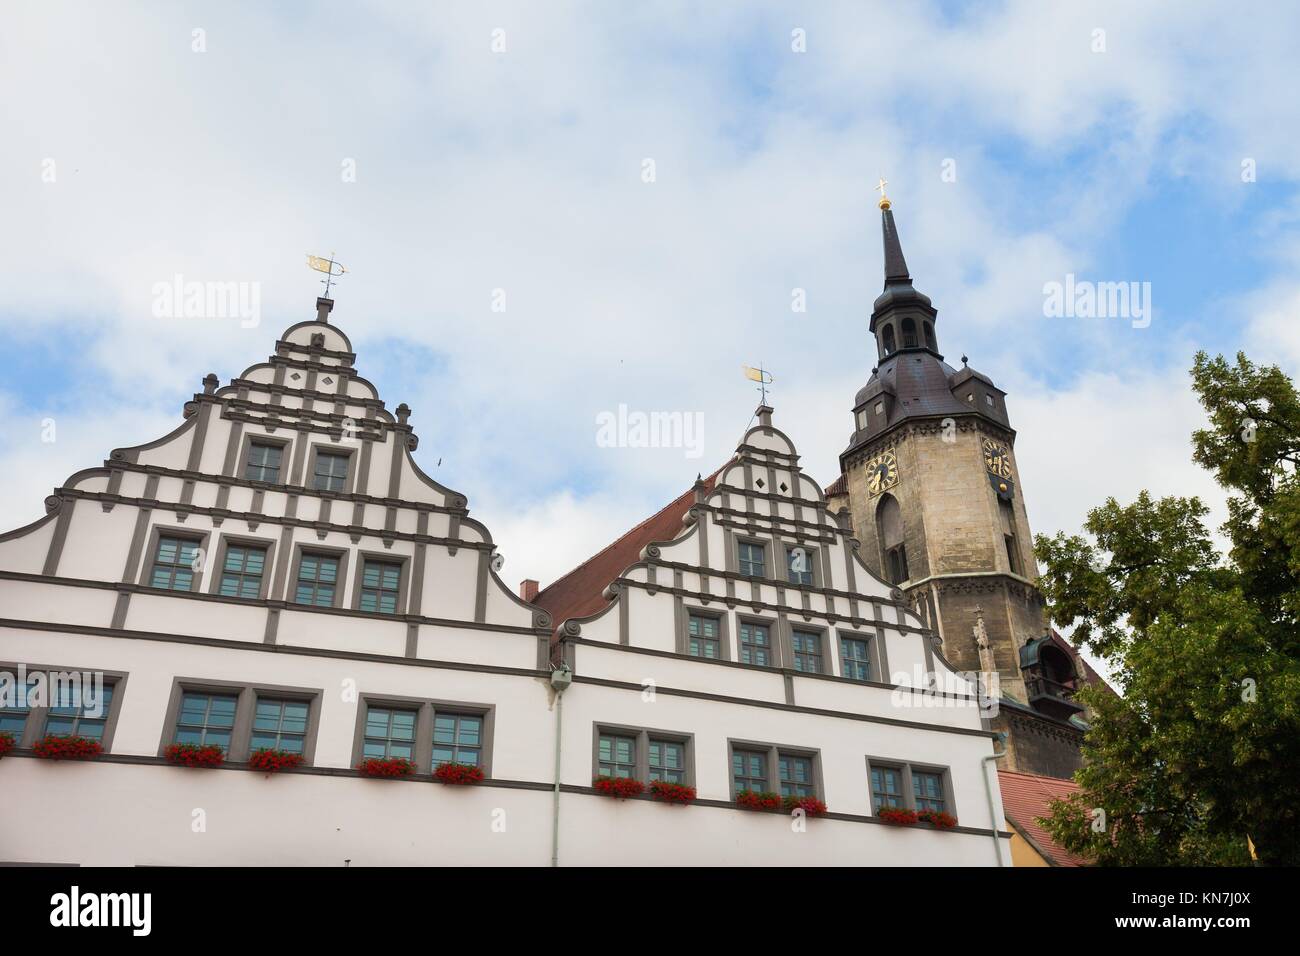 Amtsgericht (Courthouse) in Naumburg an der Saale, Germany, with St. Wenzel church. Stock Photo